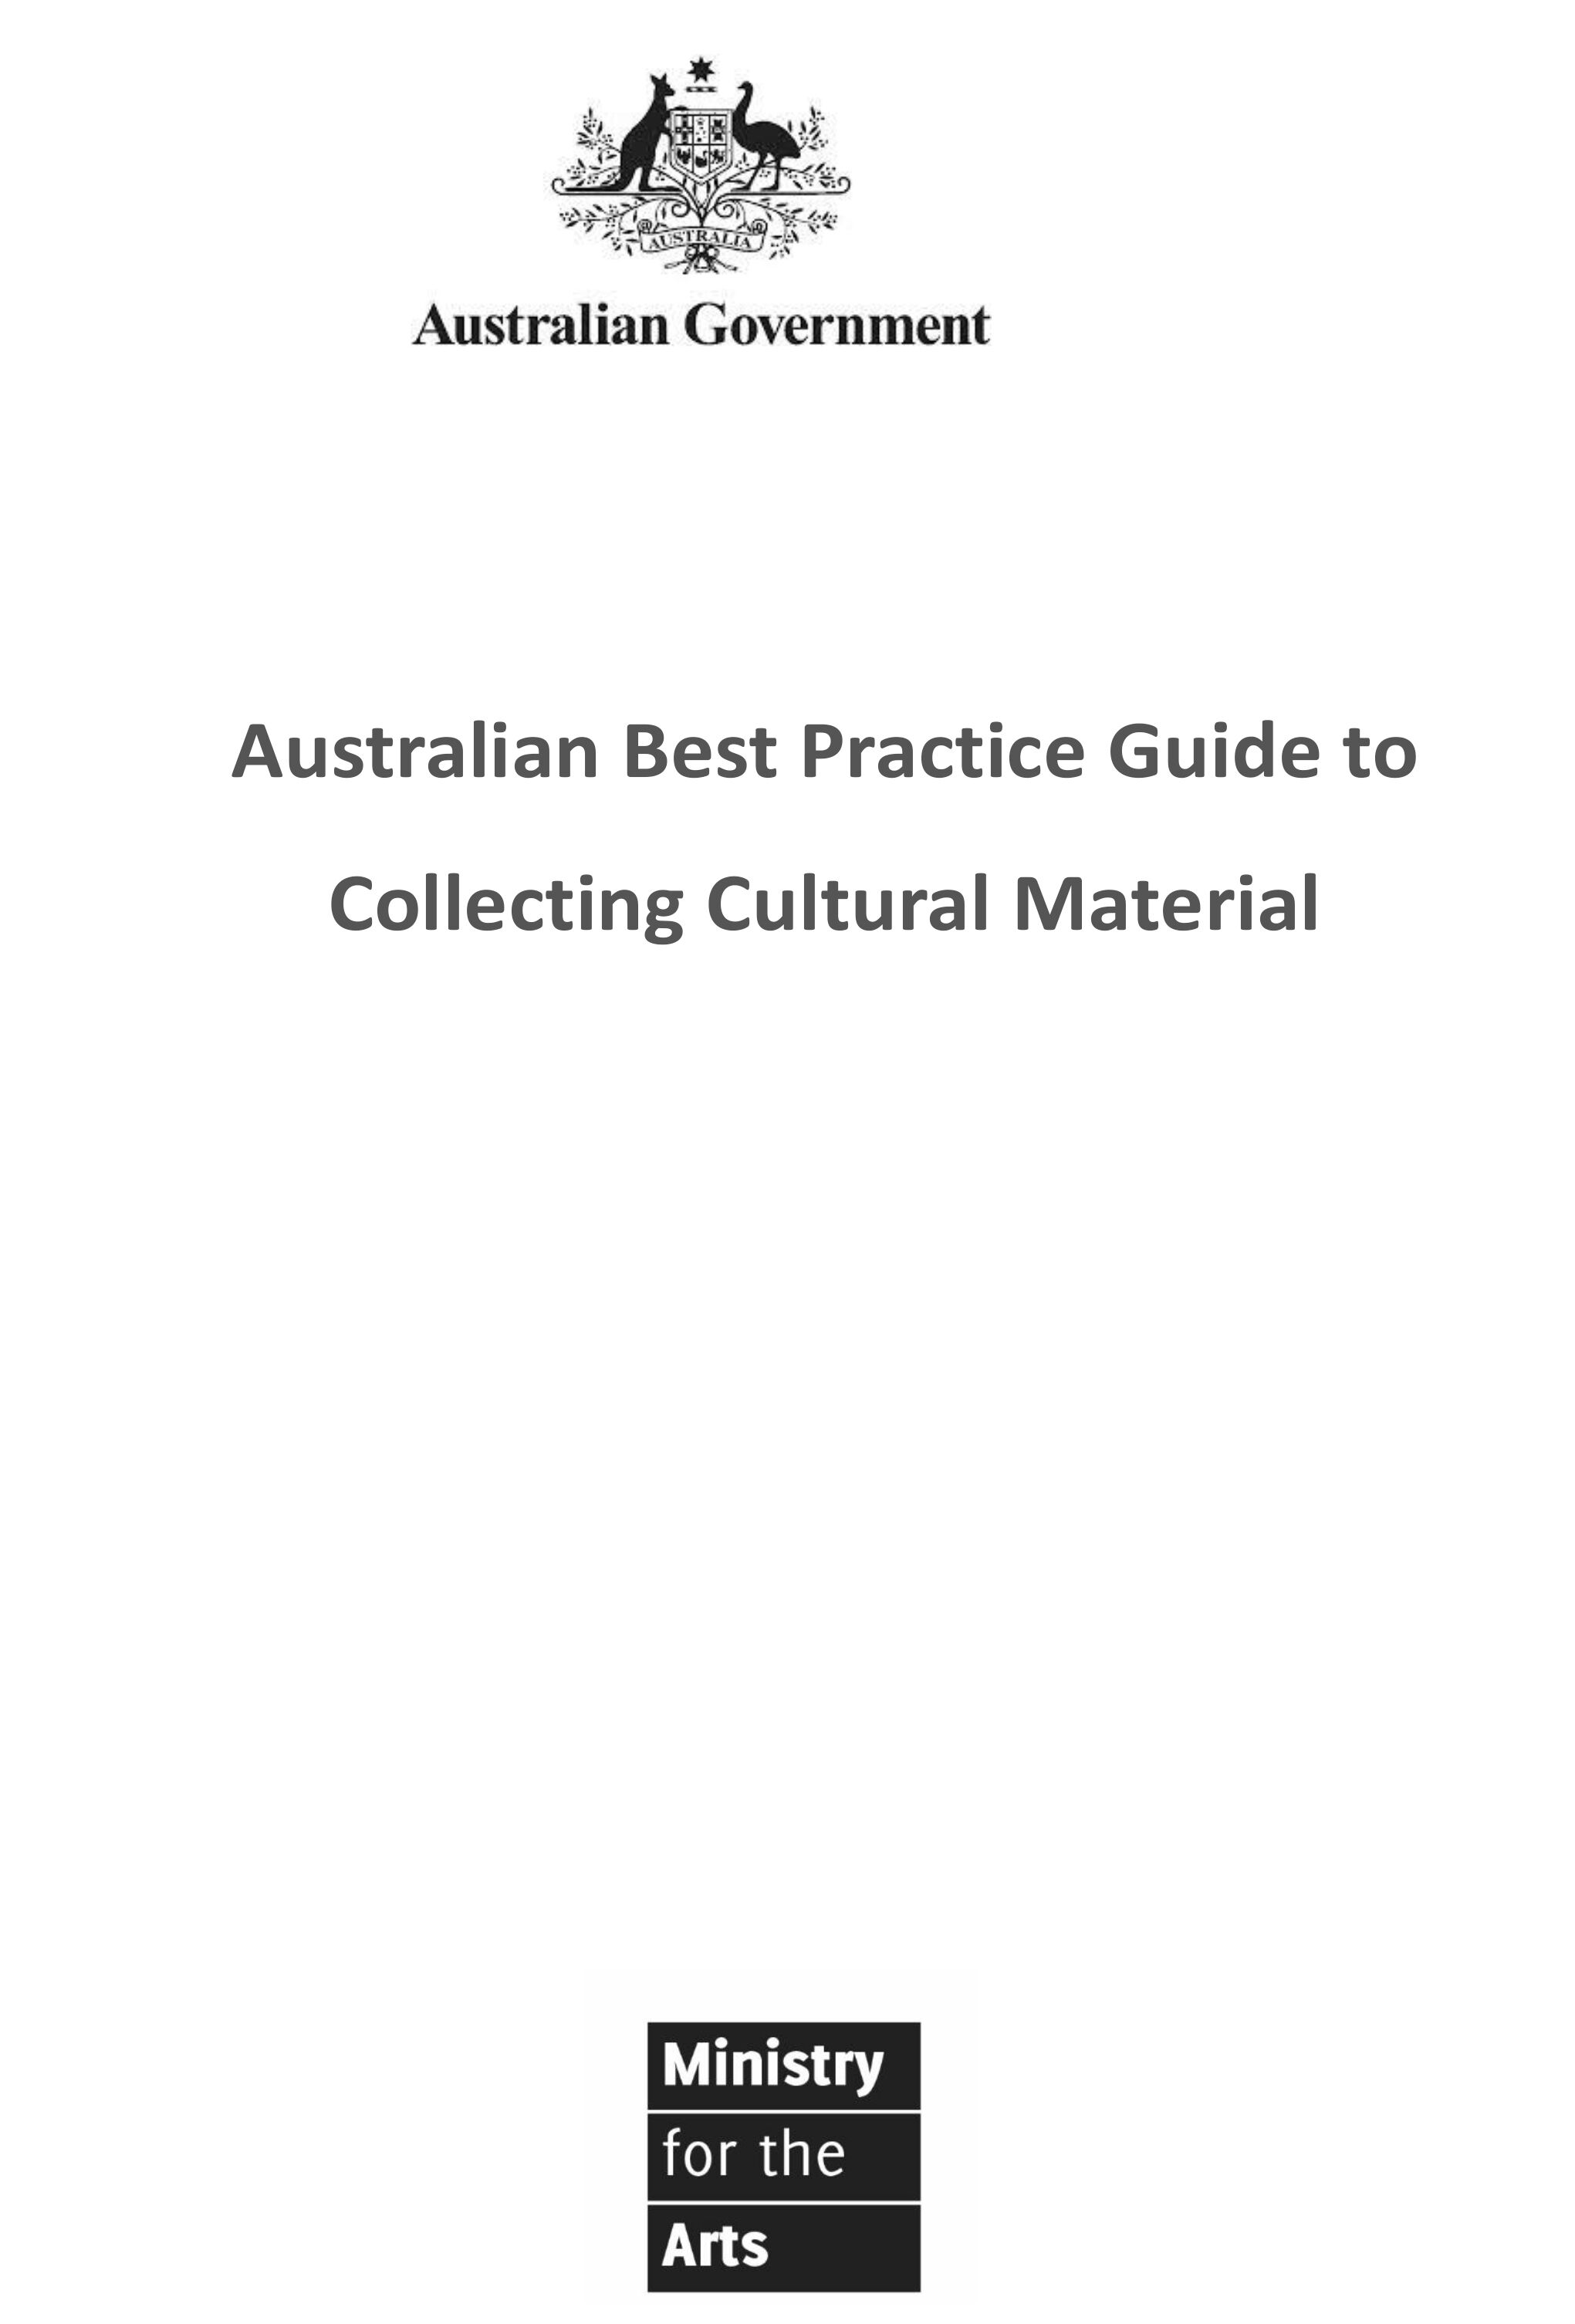 REPORT Industry cover, Australian Best Practice Guide to Collecting Cultural Material-1